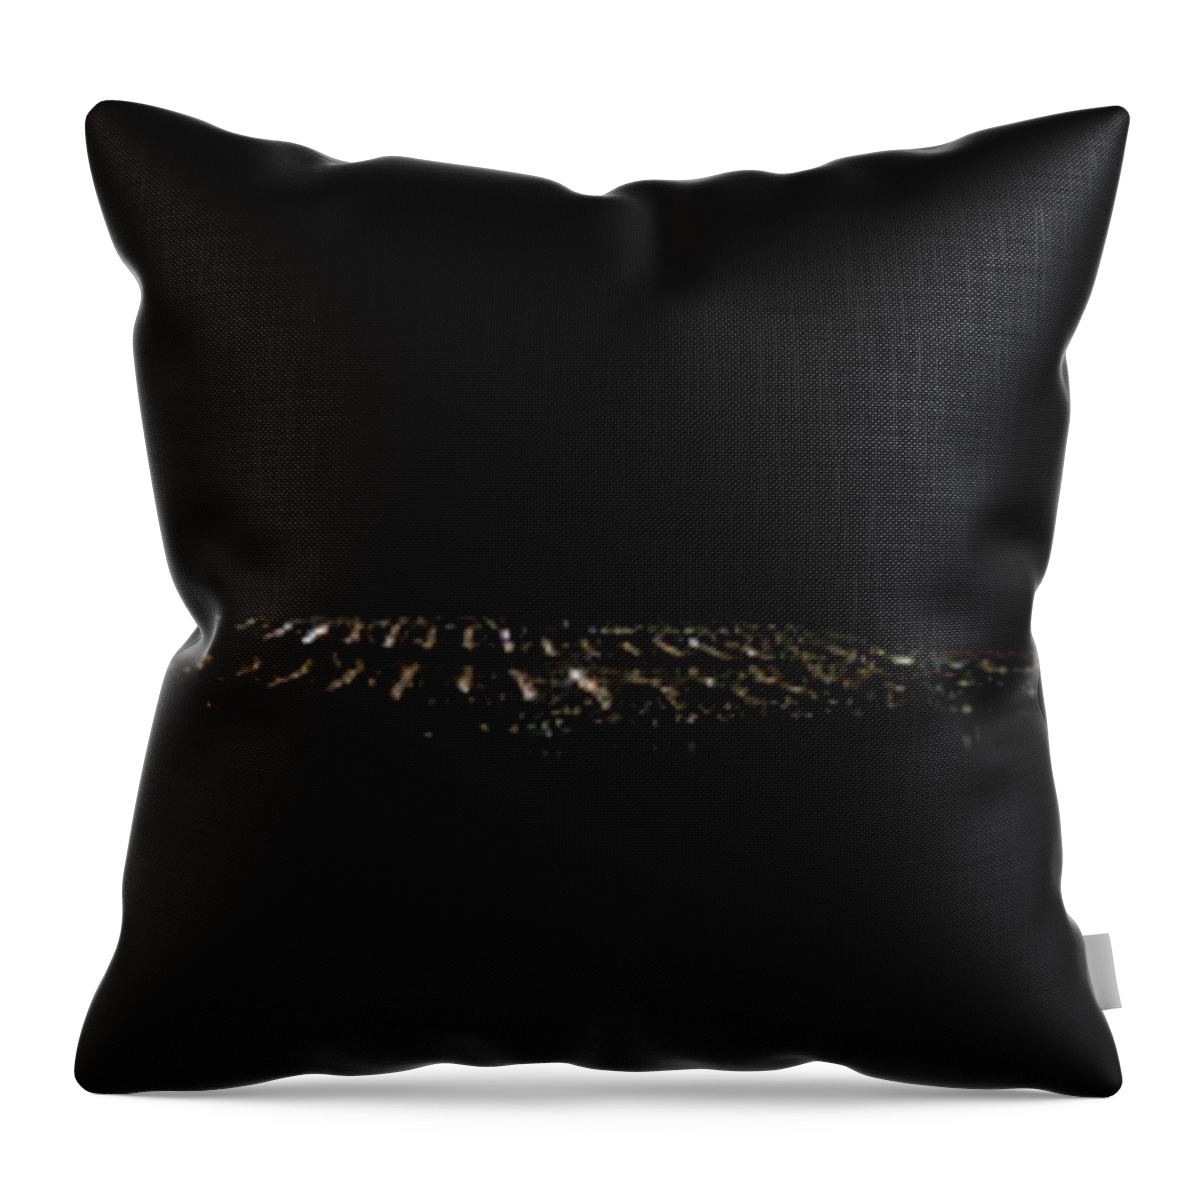 San Francisco Throw Pillow featuring the photograph San Francisco Golden Gate at Night by Grant Groberg